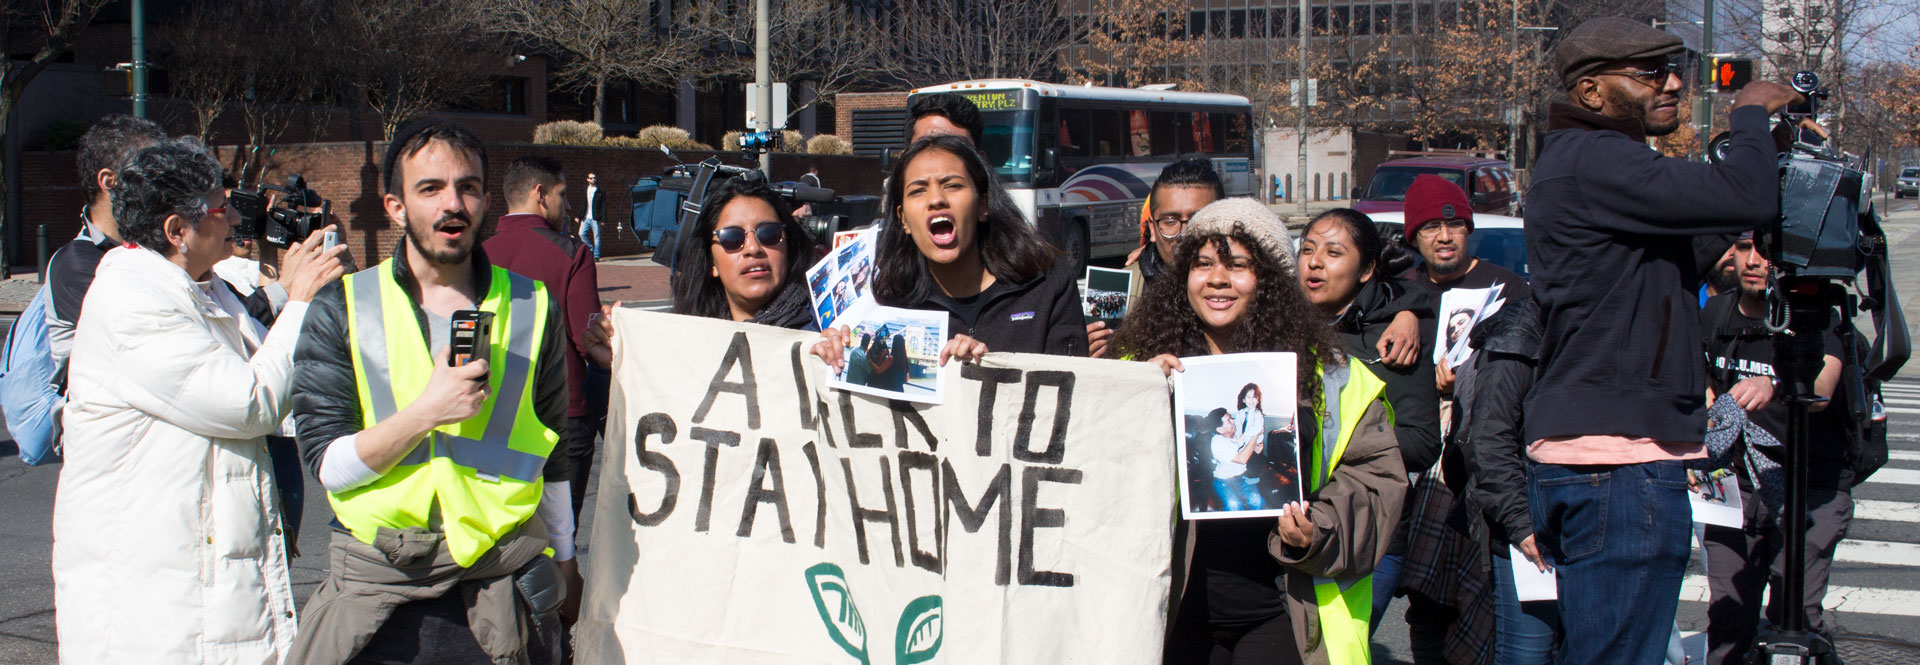 11 immigrant youth and activists held a rally at the Liberty Bell in Philadelphia on Feb. 20. The activists are walking 250 miles from New York City to Washington, D.C. to raise awareness and call on Congress to pass a clean Dream Act. Photo: Emily Neil / AL DÍA News